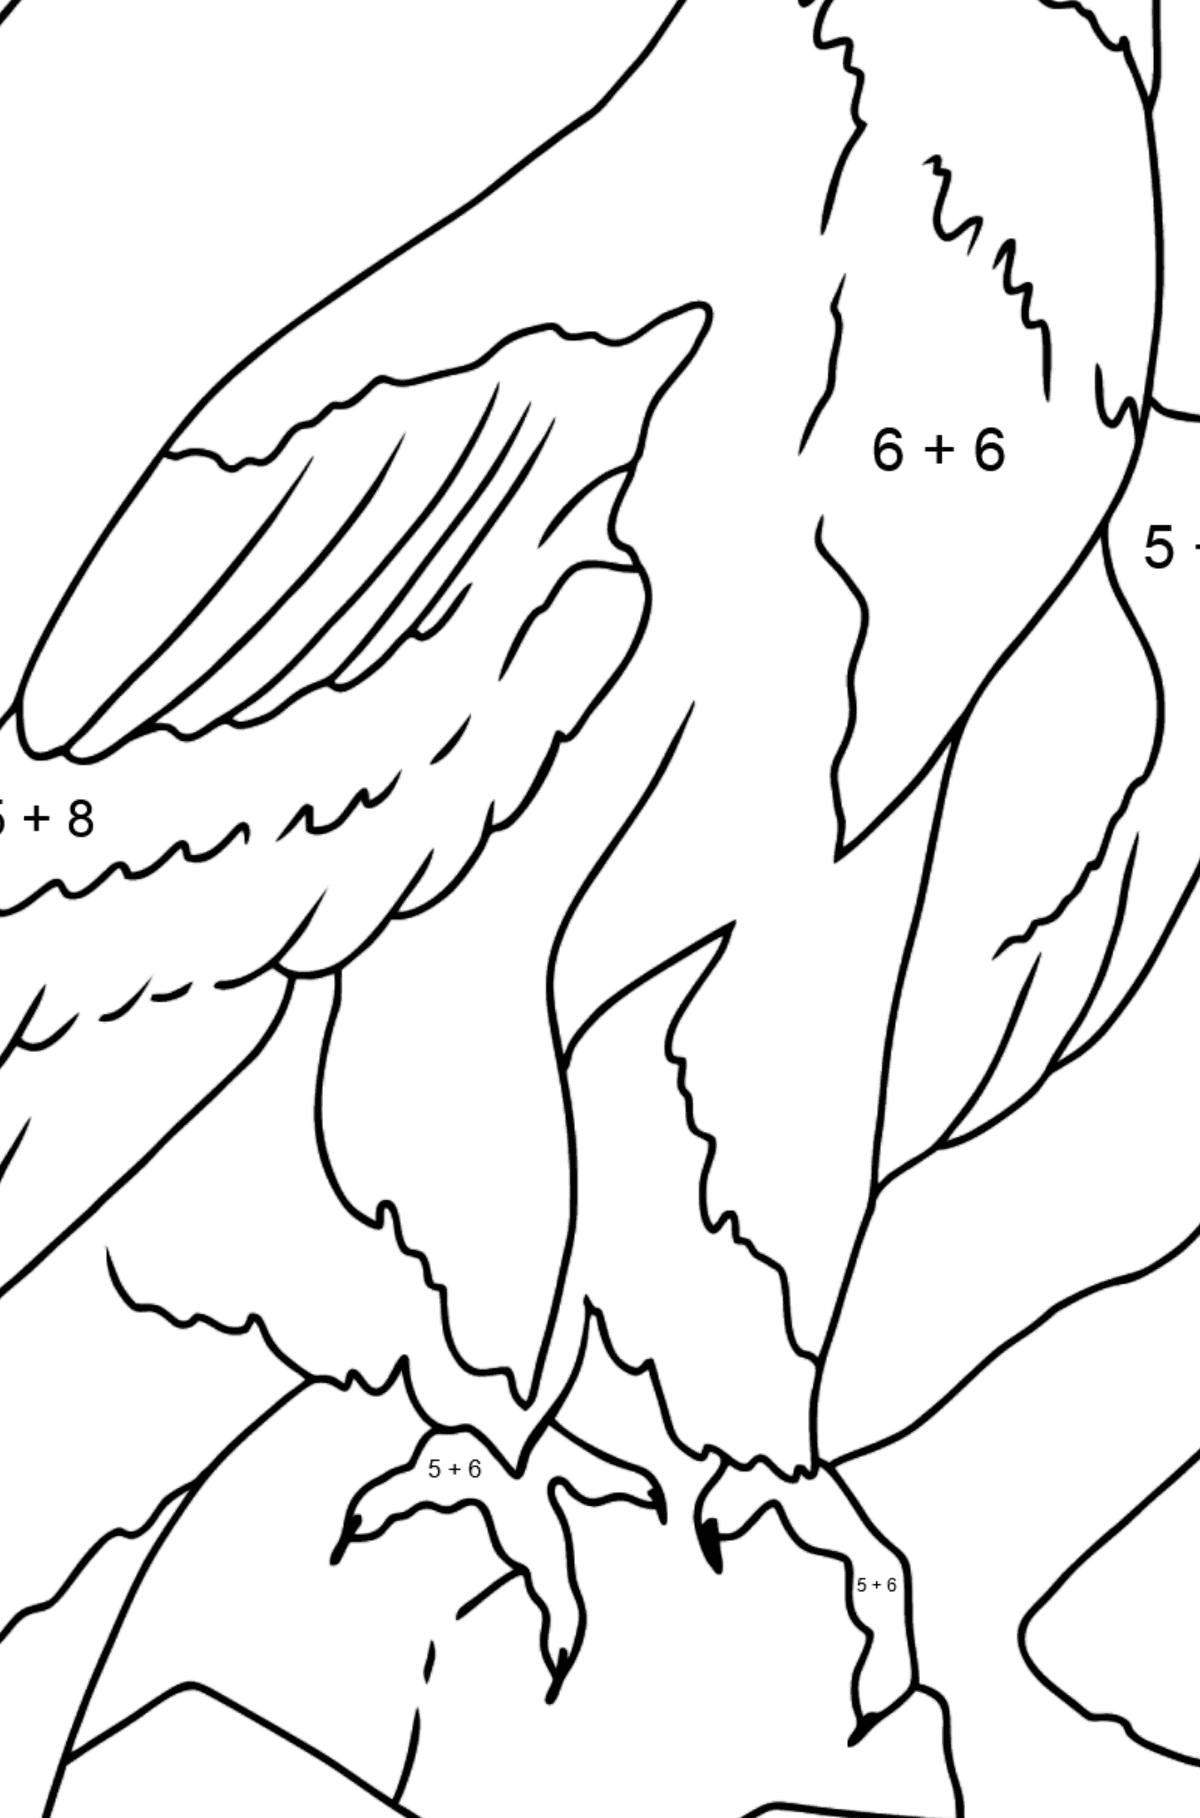 Coloring Page - An Eagle is on the Hunt - Math Coloring - Addition for Kids